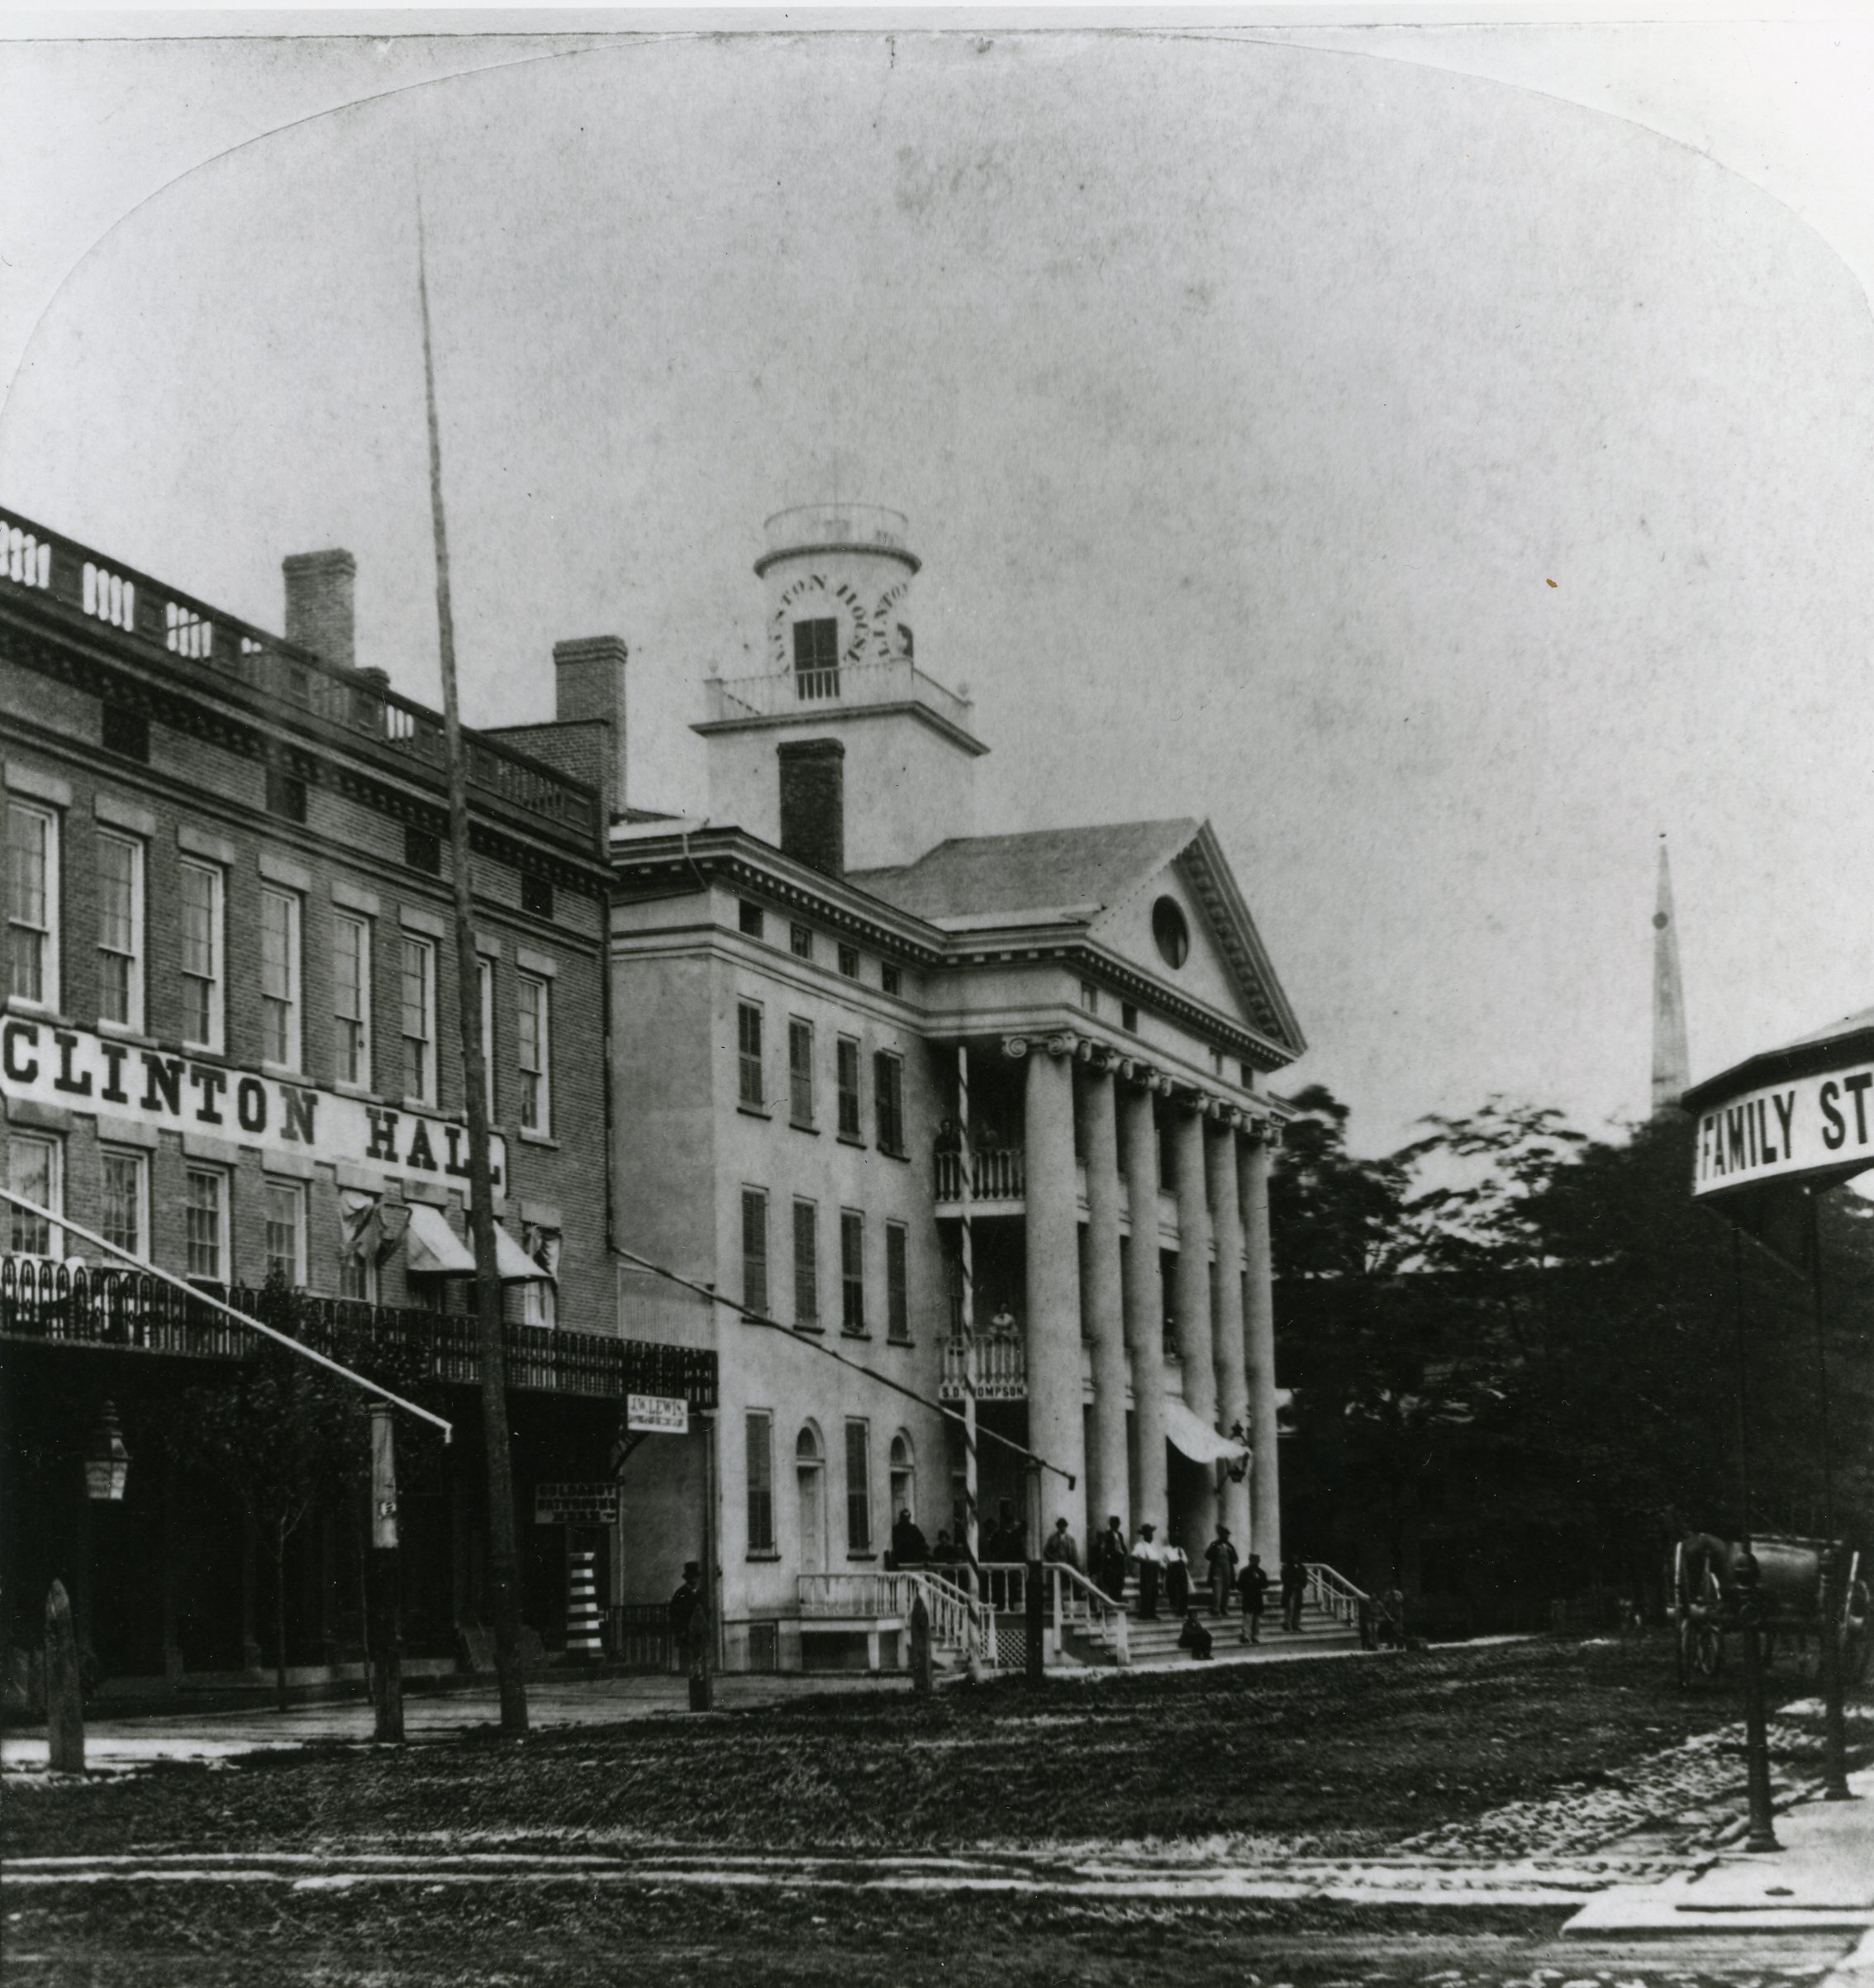 Black and white image of clinton hall